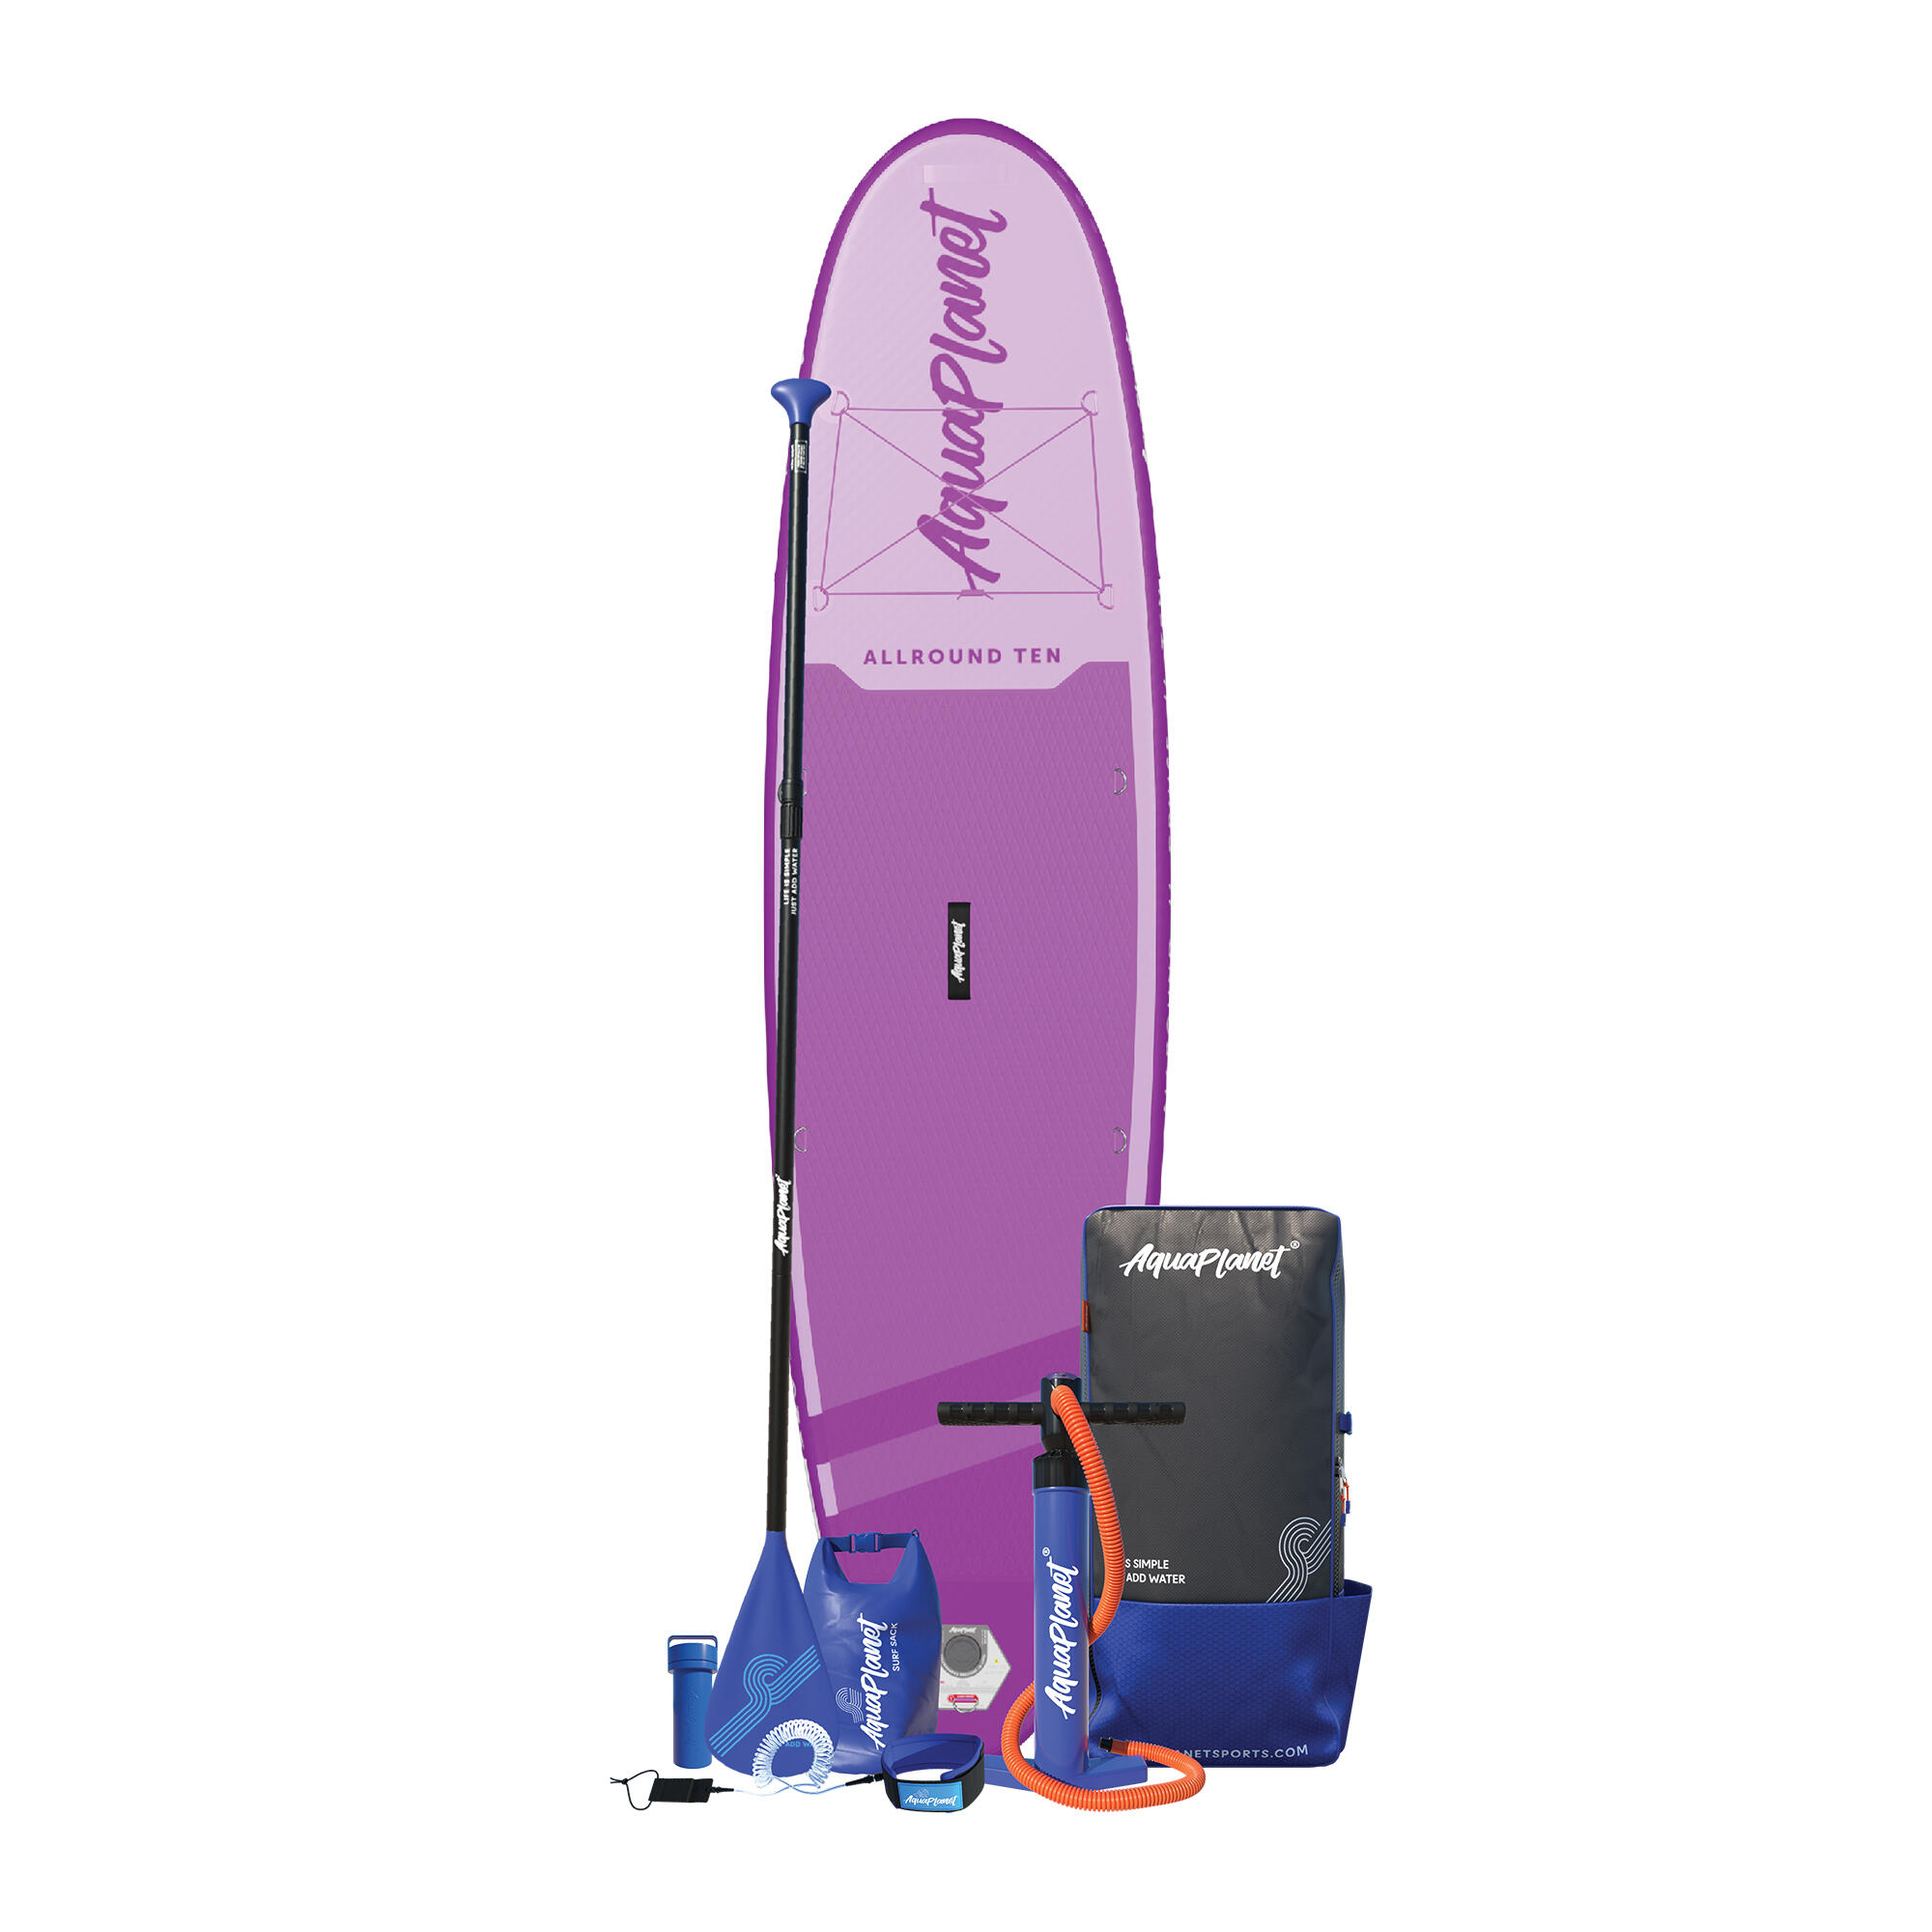 Aquaplanet ALLROUND TEN 10’ Inflatable Paddle Board Package - Purple 2/6